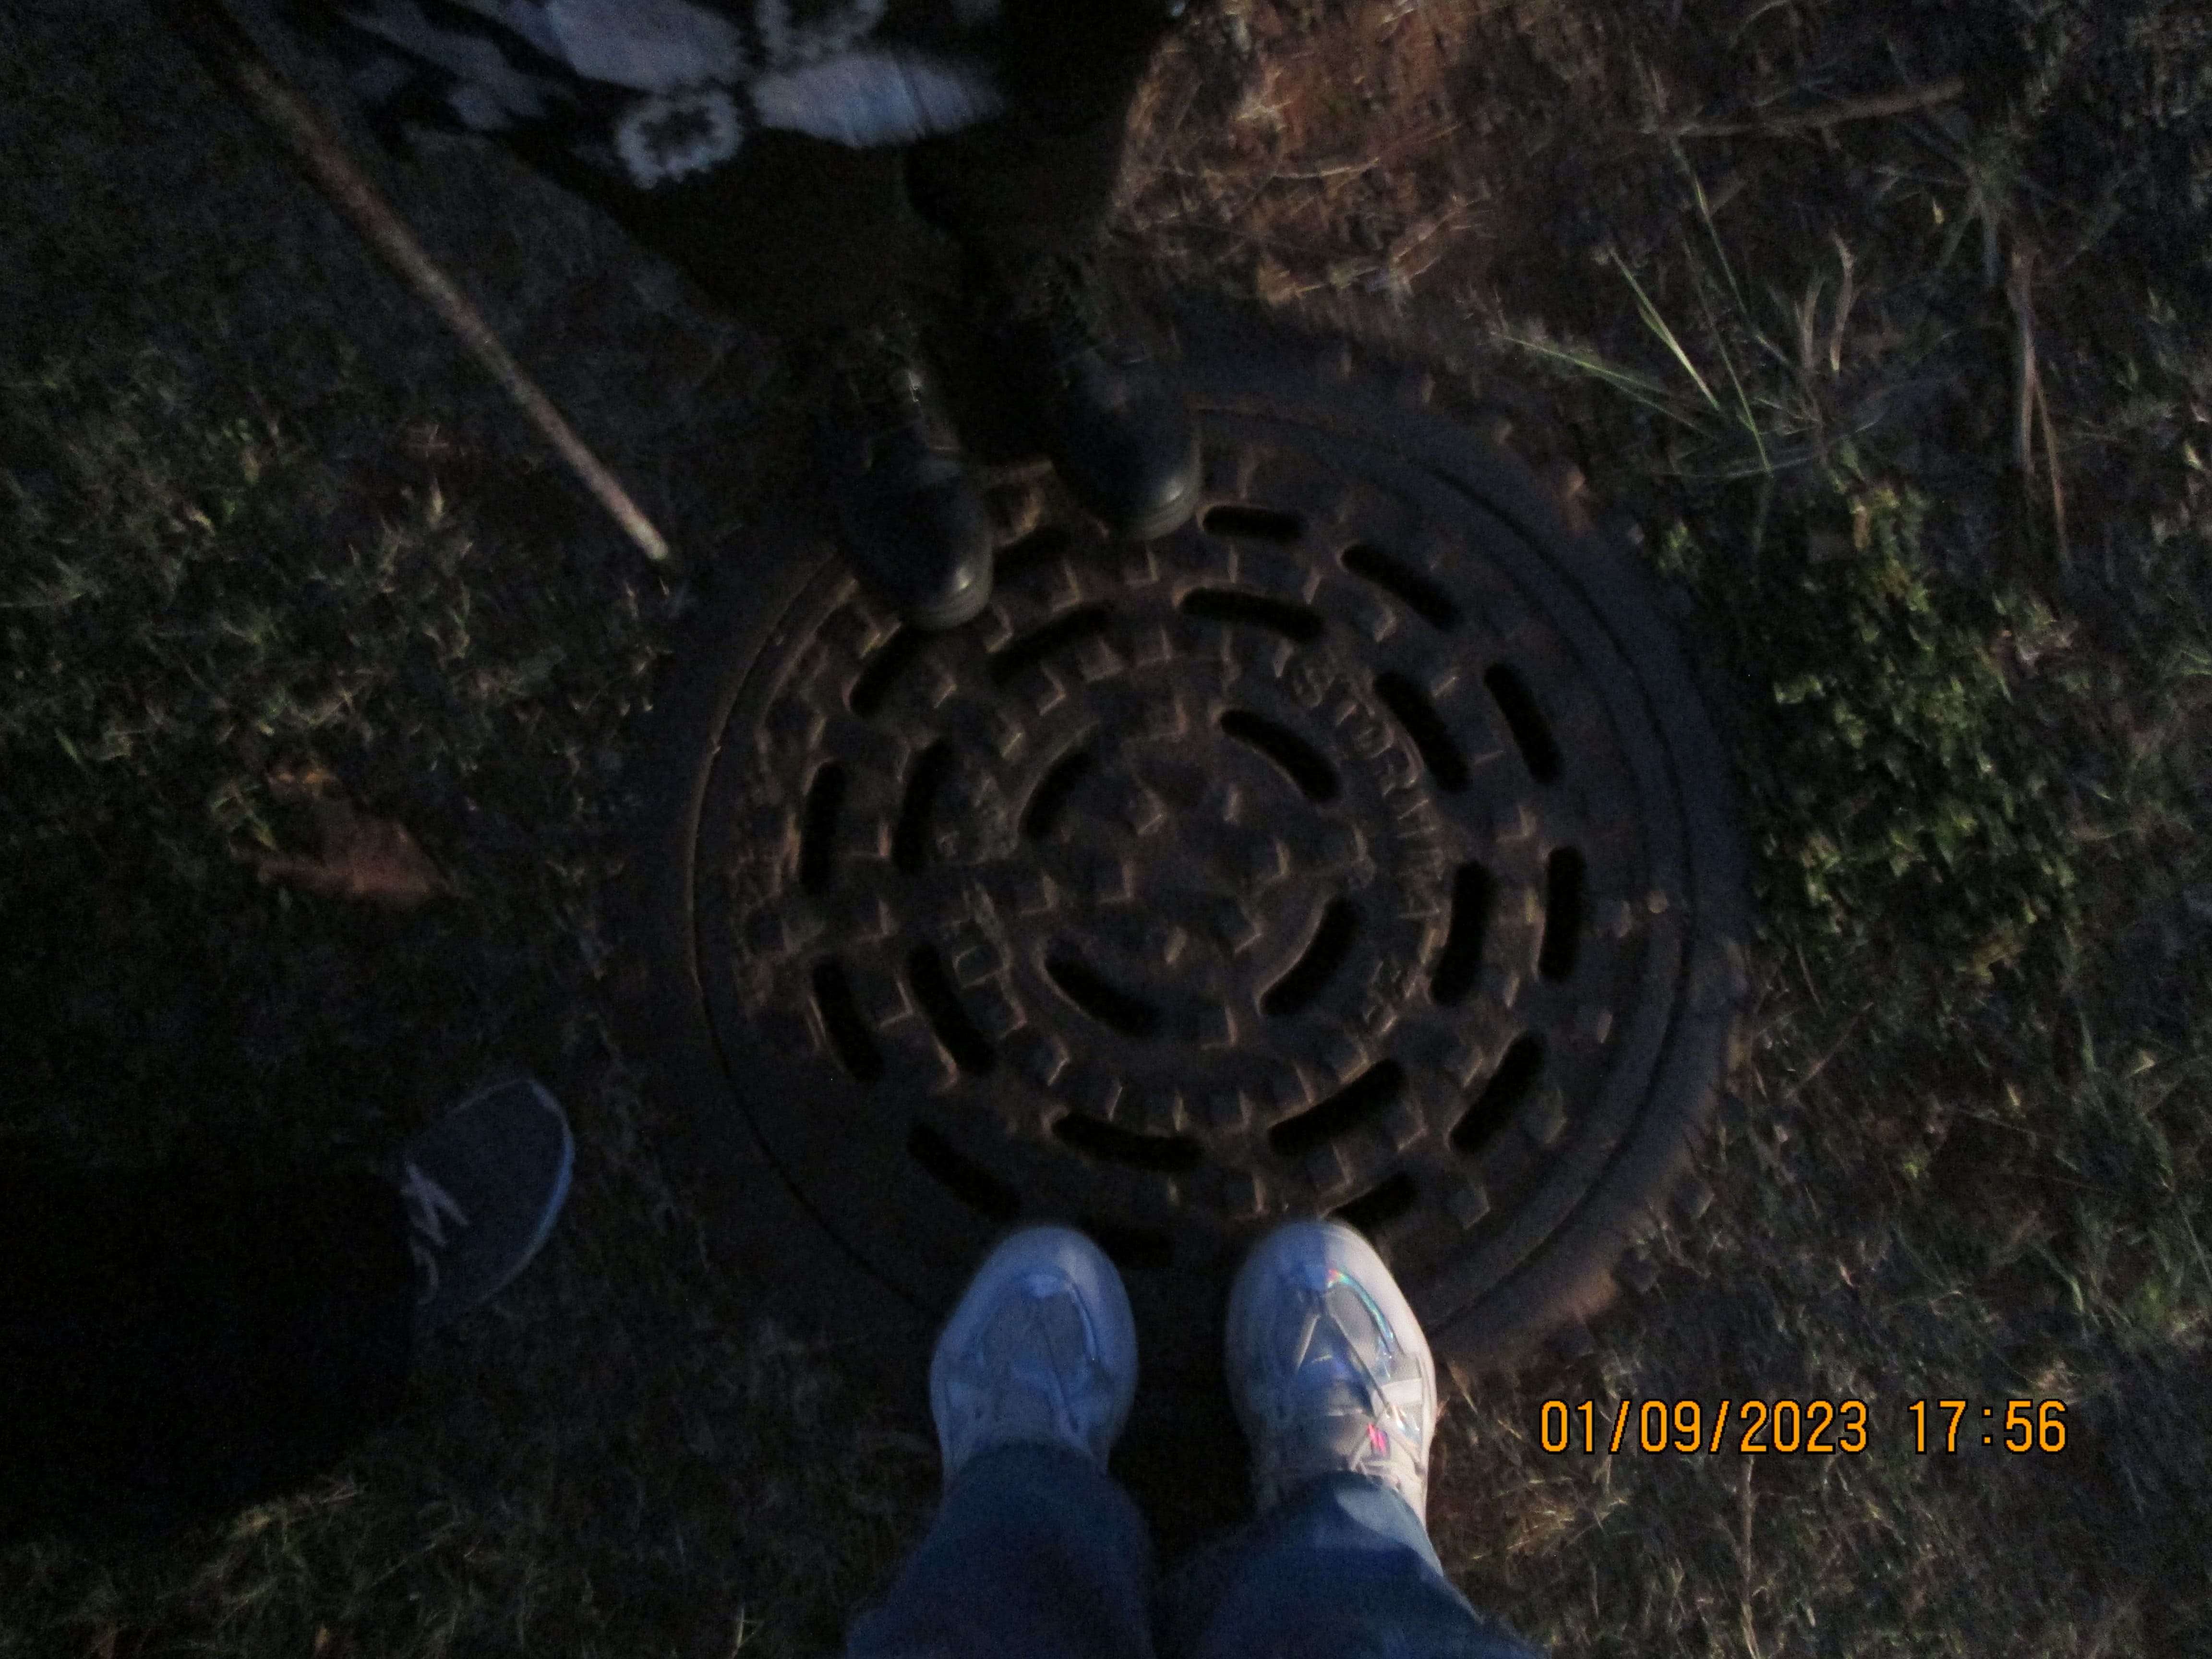 topdown view of shoes and there owners on a manhole cover, there is a light coming from somewhere outside the picture